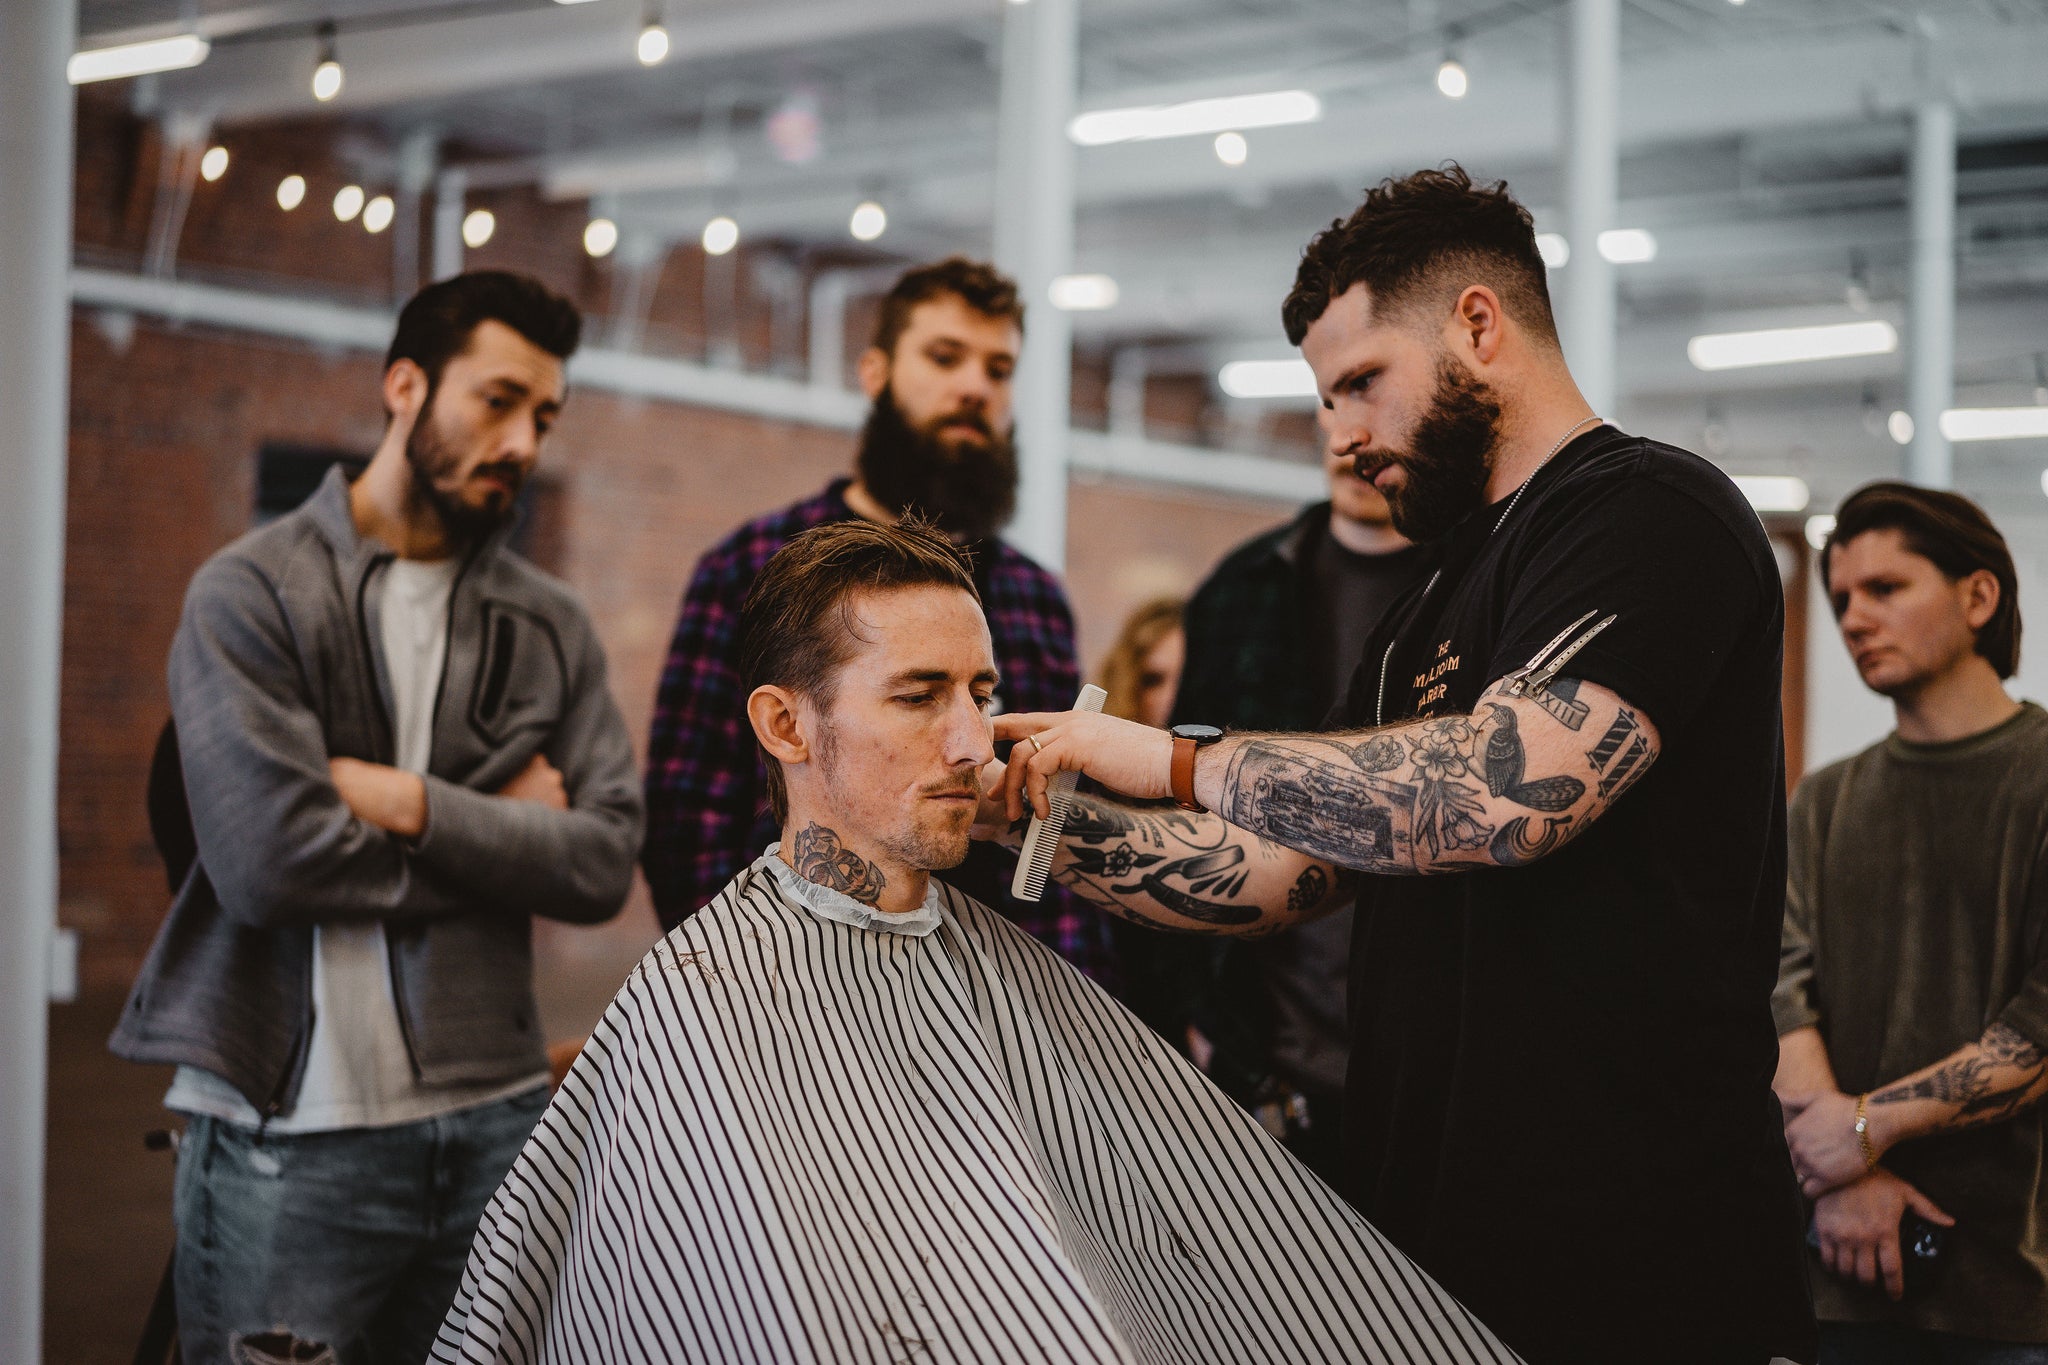 What is your competitive advantage as a barber?